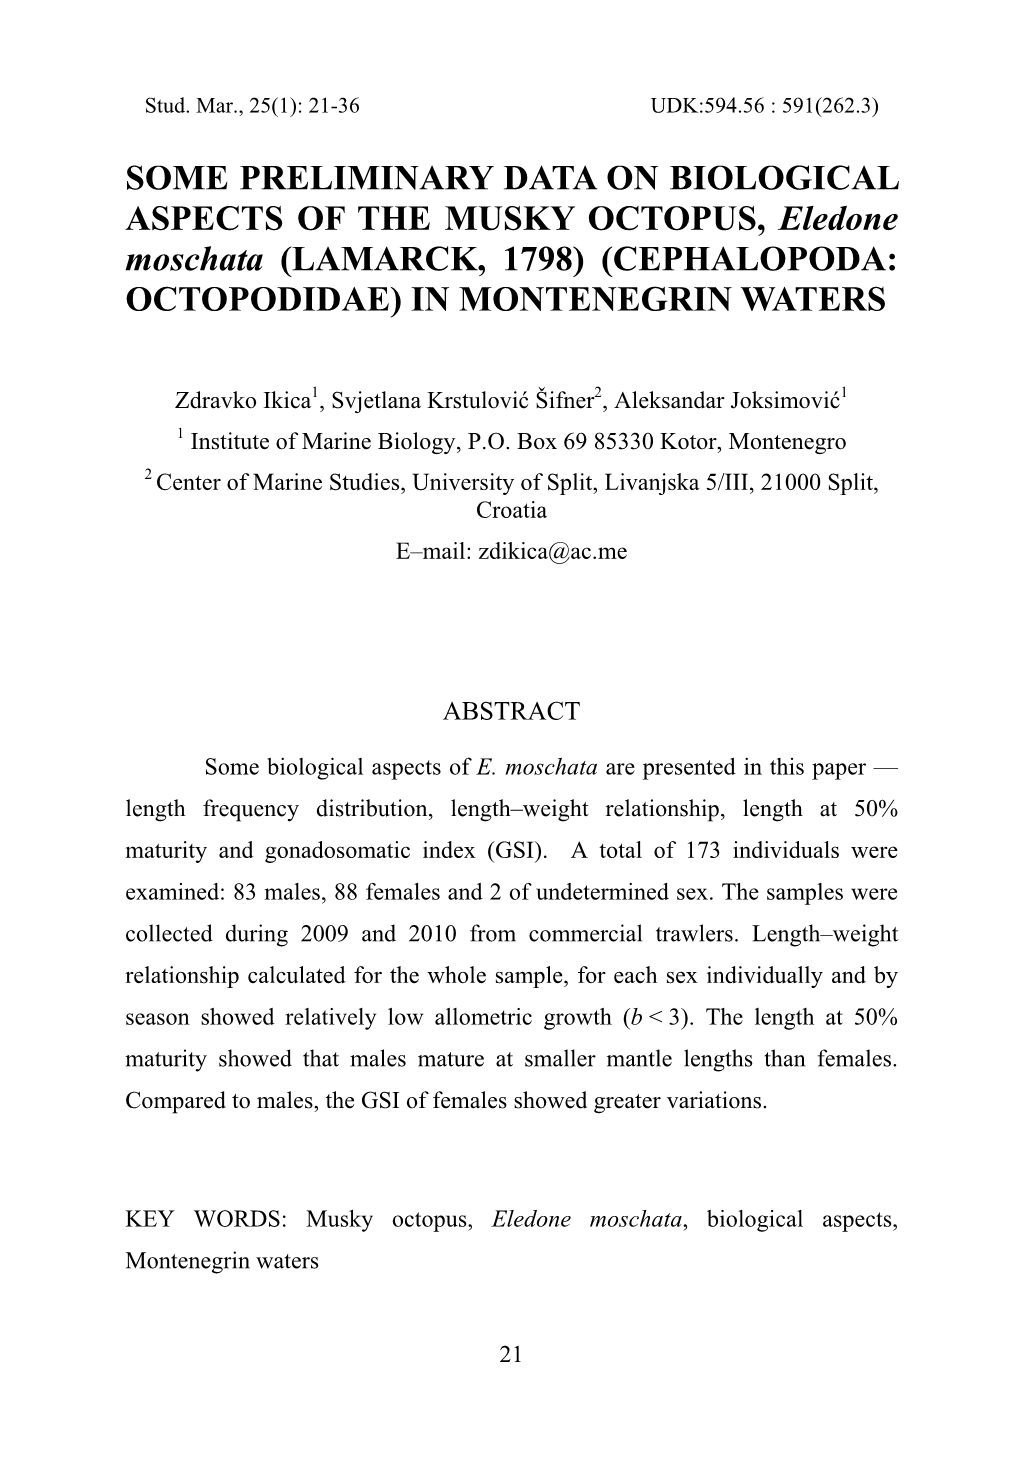 SOME PRELIMINARY DATA on BIOLOGICAL ASPECTS of the MUSKY OCTOPUS, Eledone Moschata (LAMARCK, 1798) (CEPHALOPODA: OCTOPODIDAE) in MONTENEGRIN WATERS